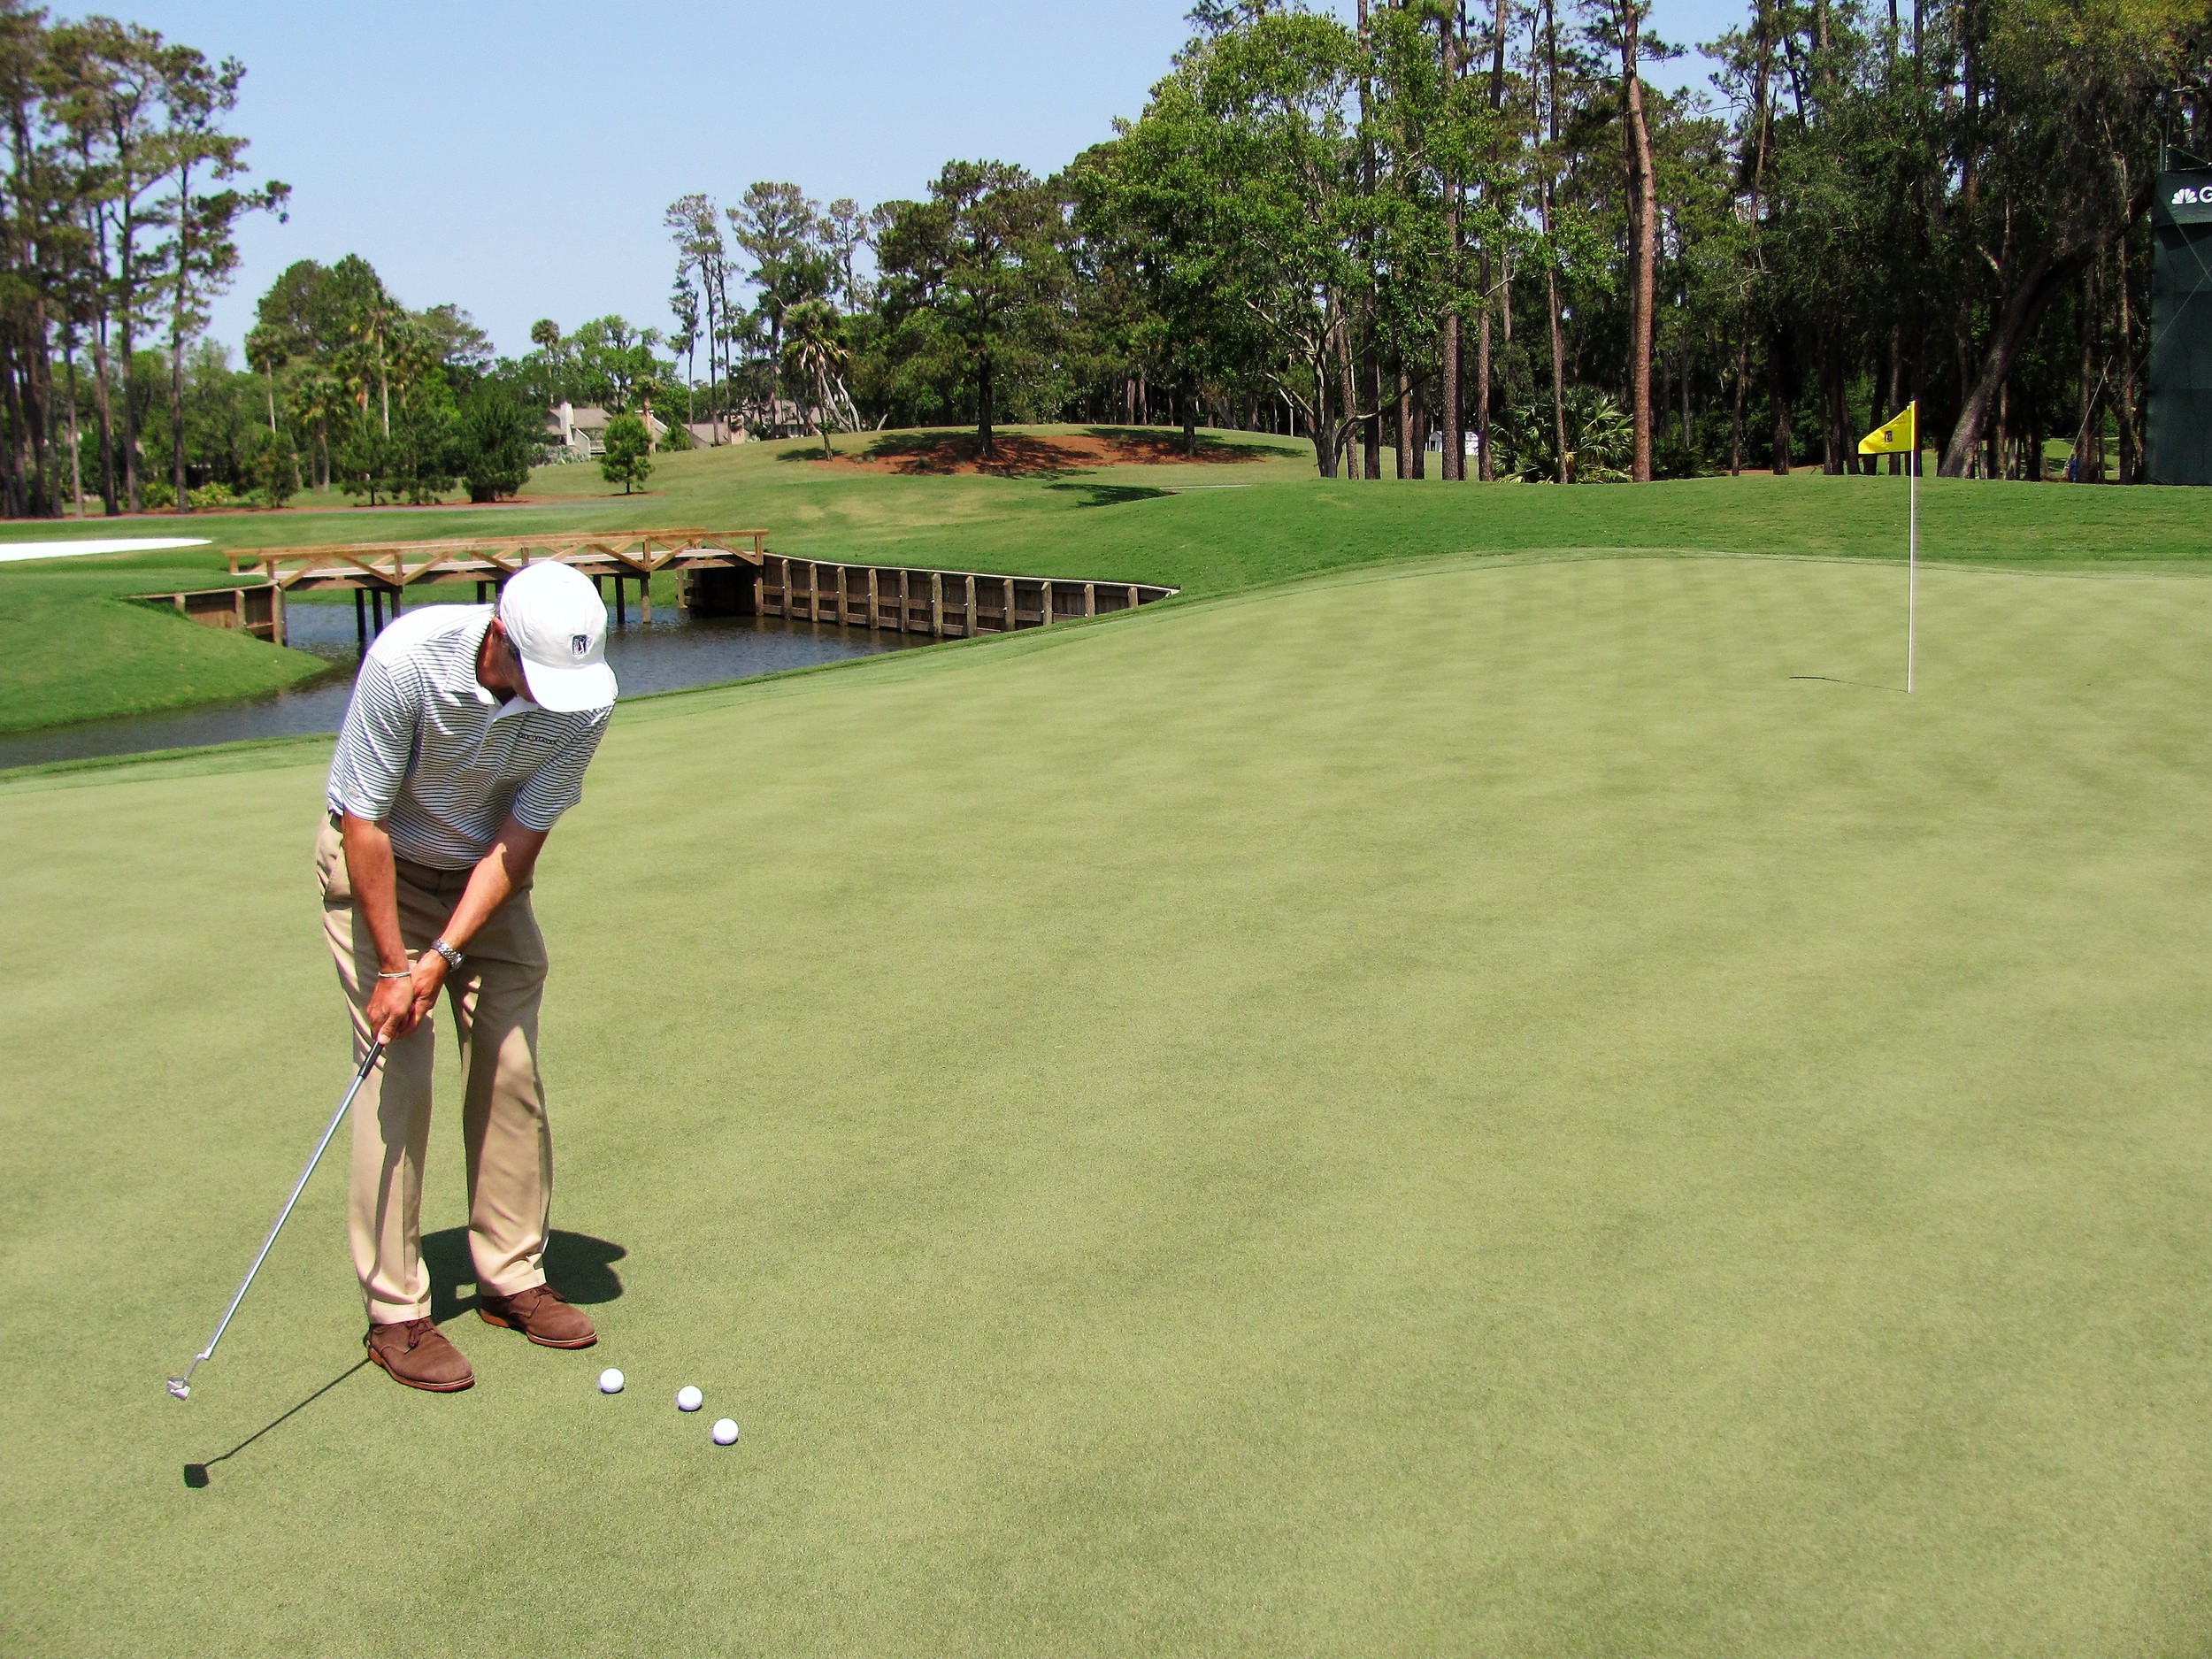 Stephen Cox sets a hole location at TPC Sawgrass.